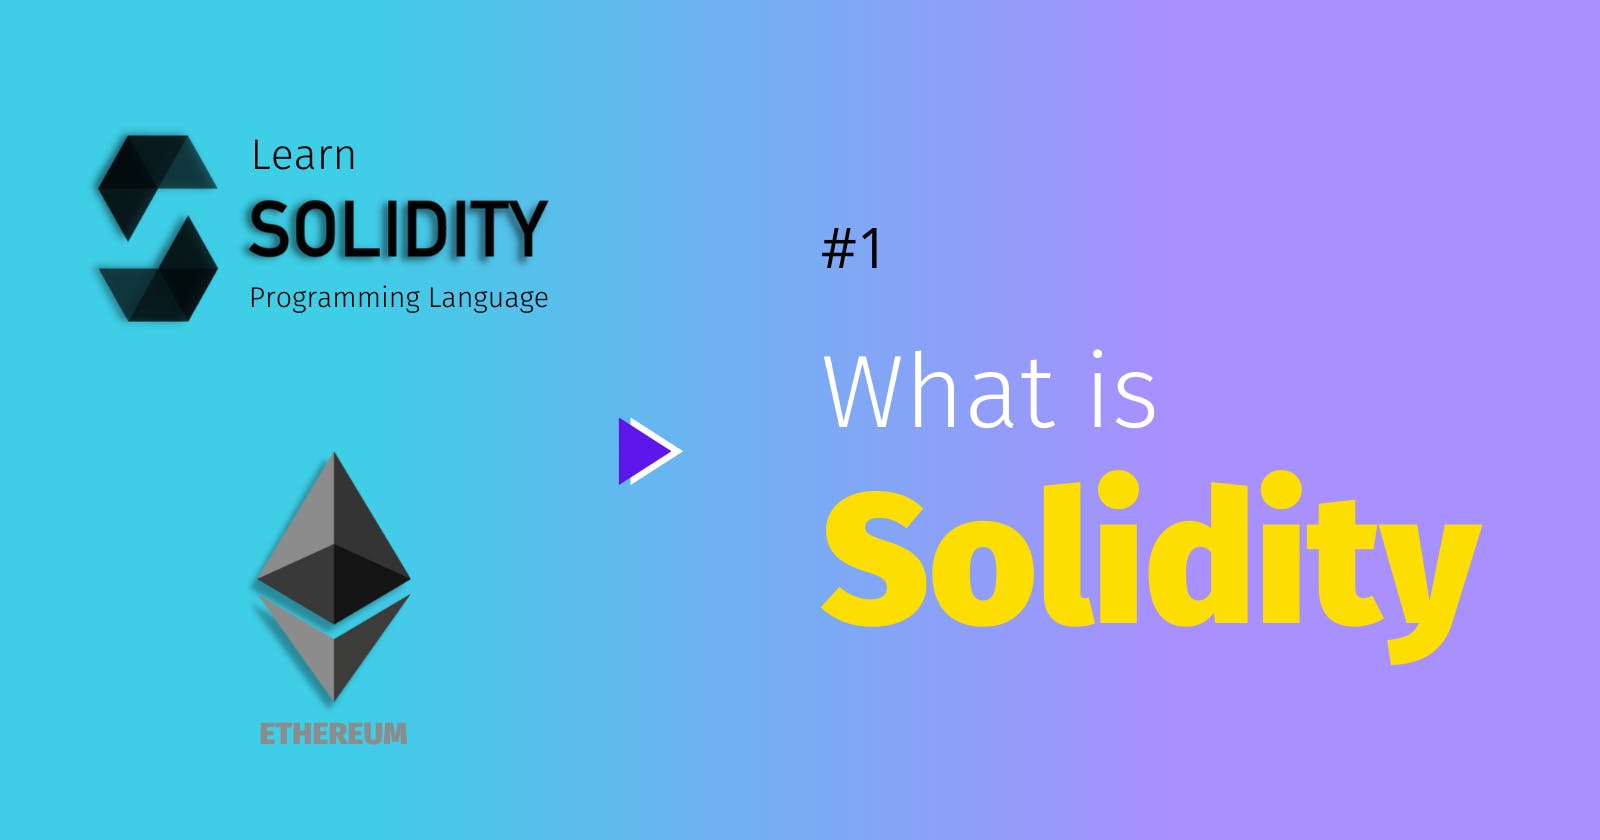 What is Solidity programming language